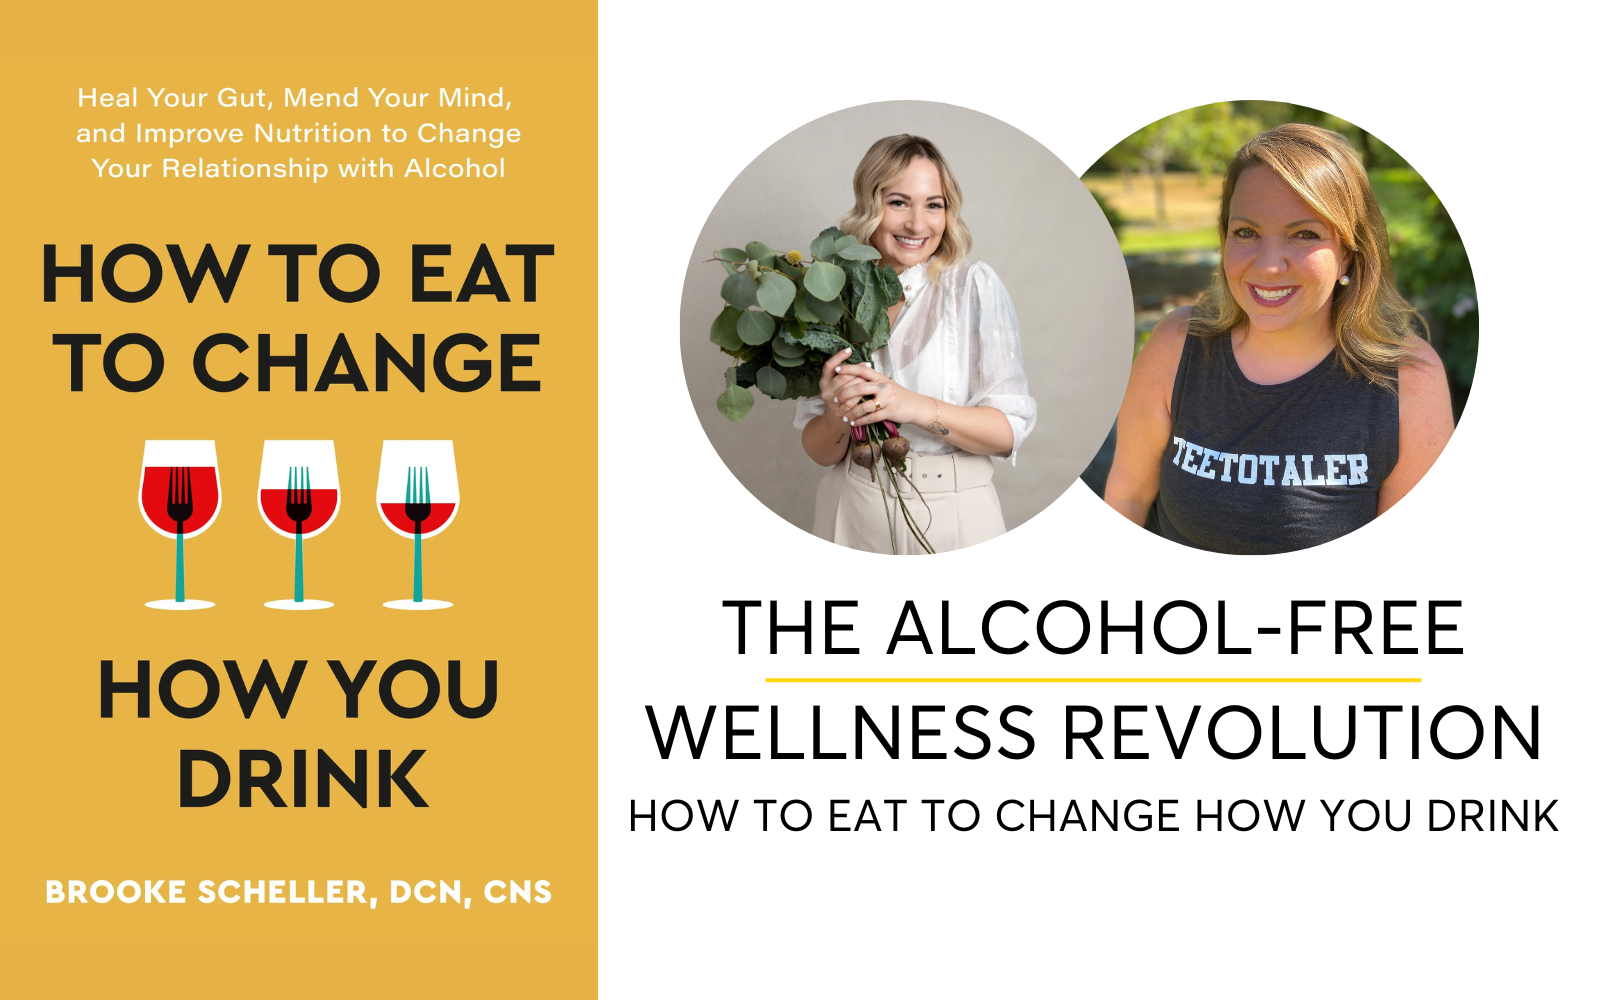 The Alcohol-Free Wellness Revolution: How To Eat To Change How You Drink